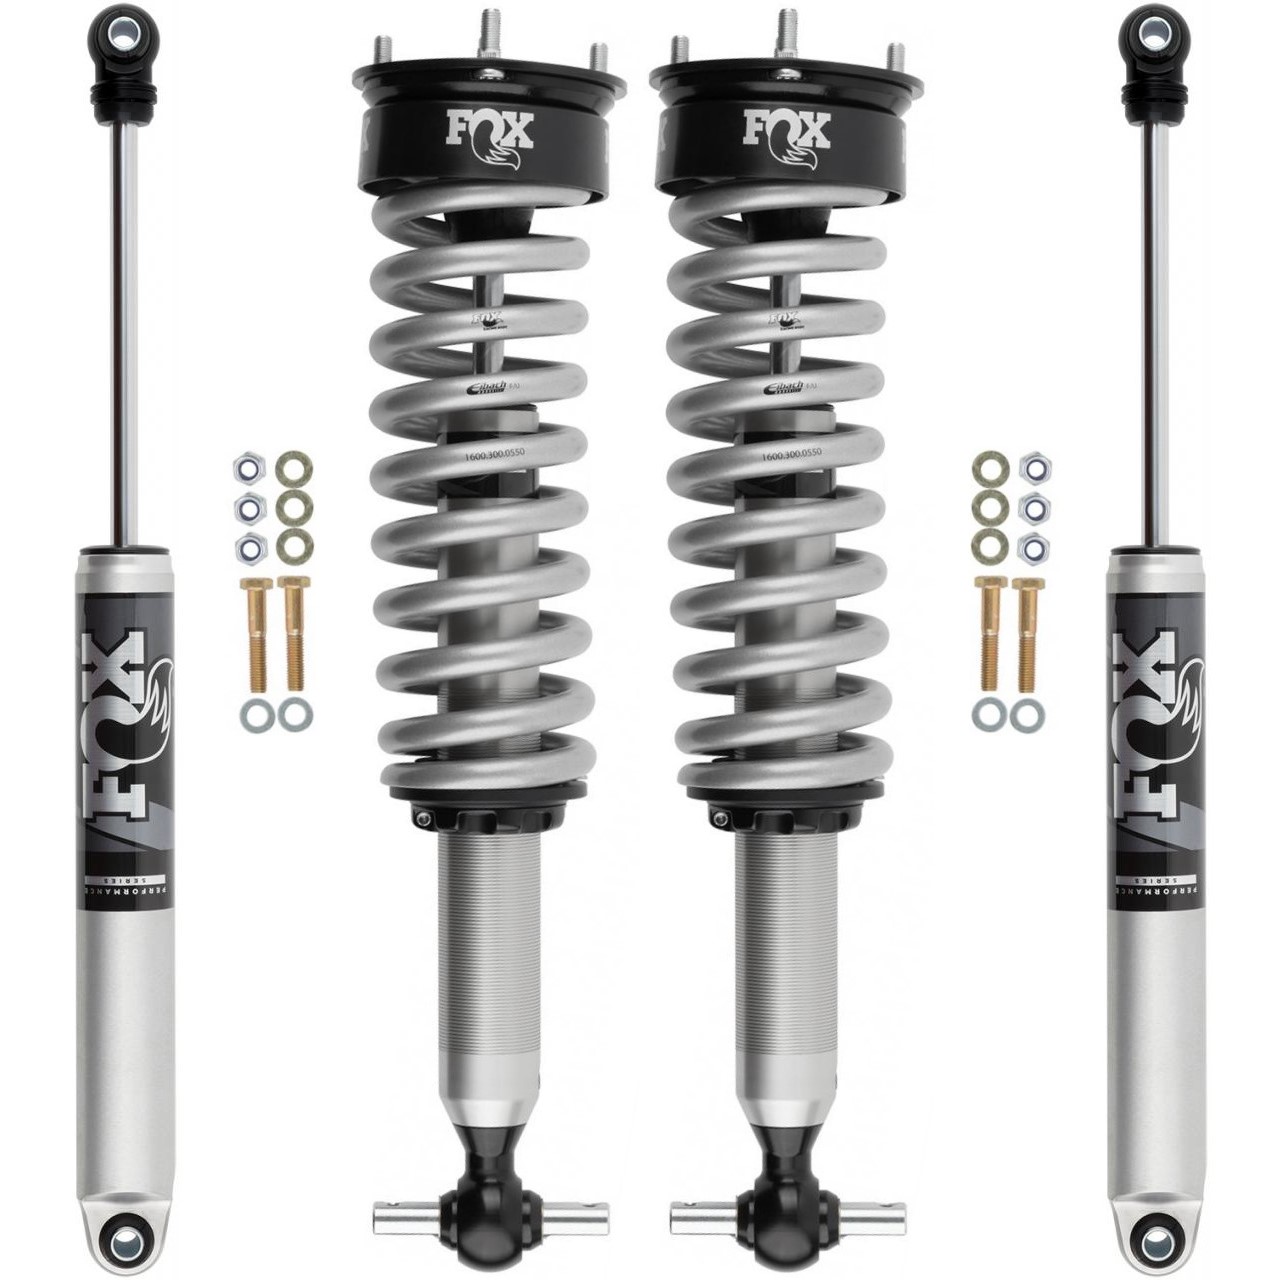 Fox 2.0 IFP Smooth Body Coil Over Shock Front Rear For Silverado Sierra 1500 